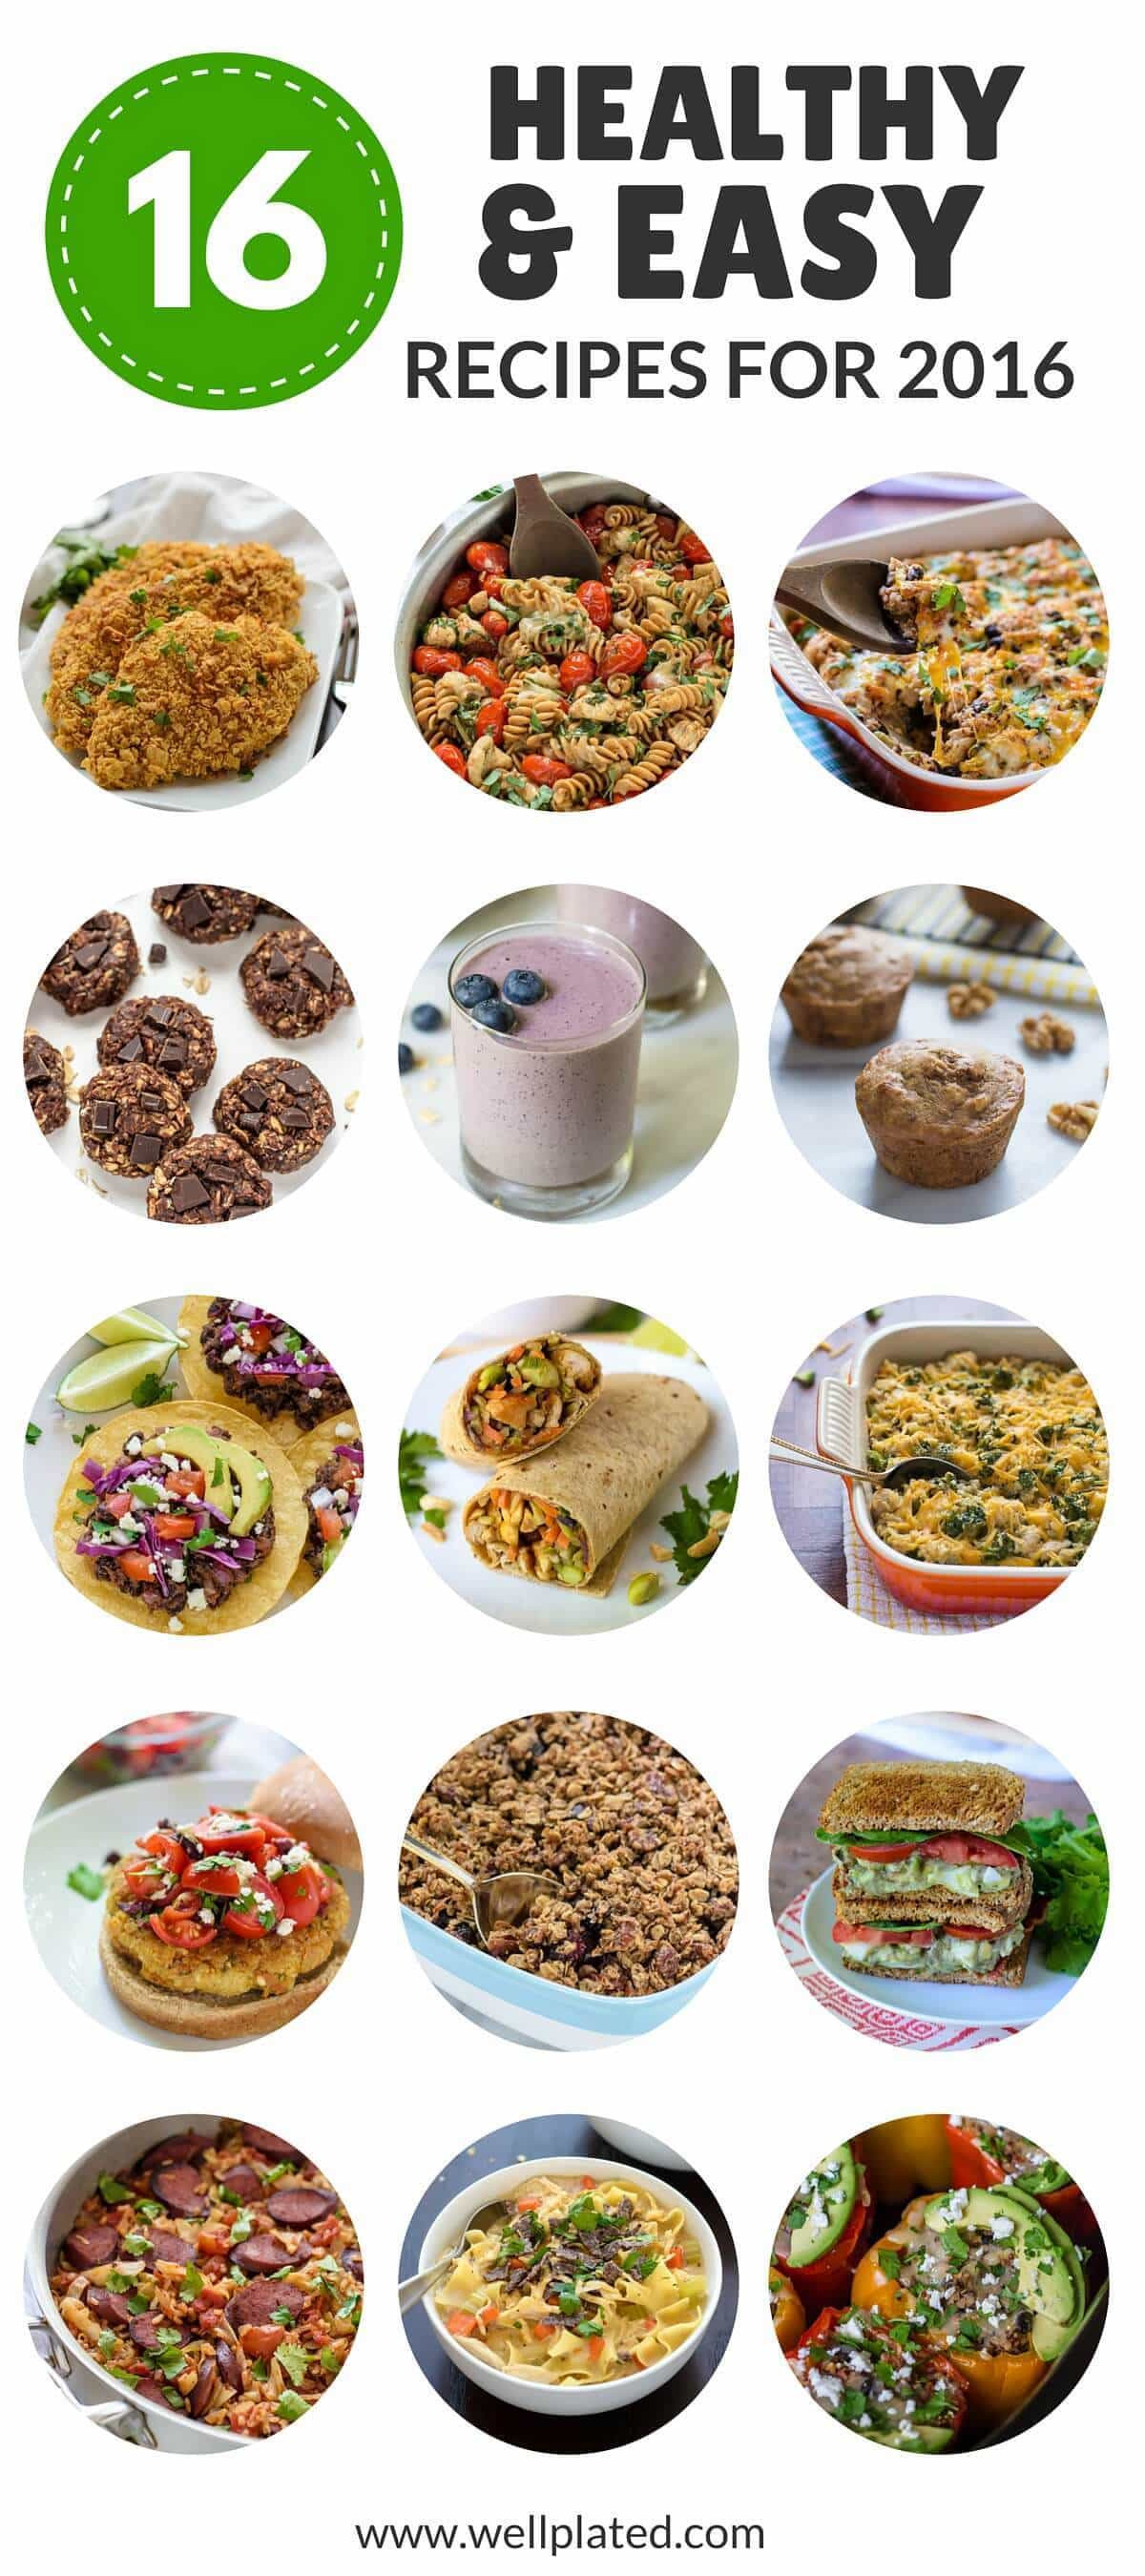 Healthy Things To Eat For Dinner
 16 Easy Healthy Recipes to Try in 2016